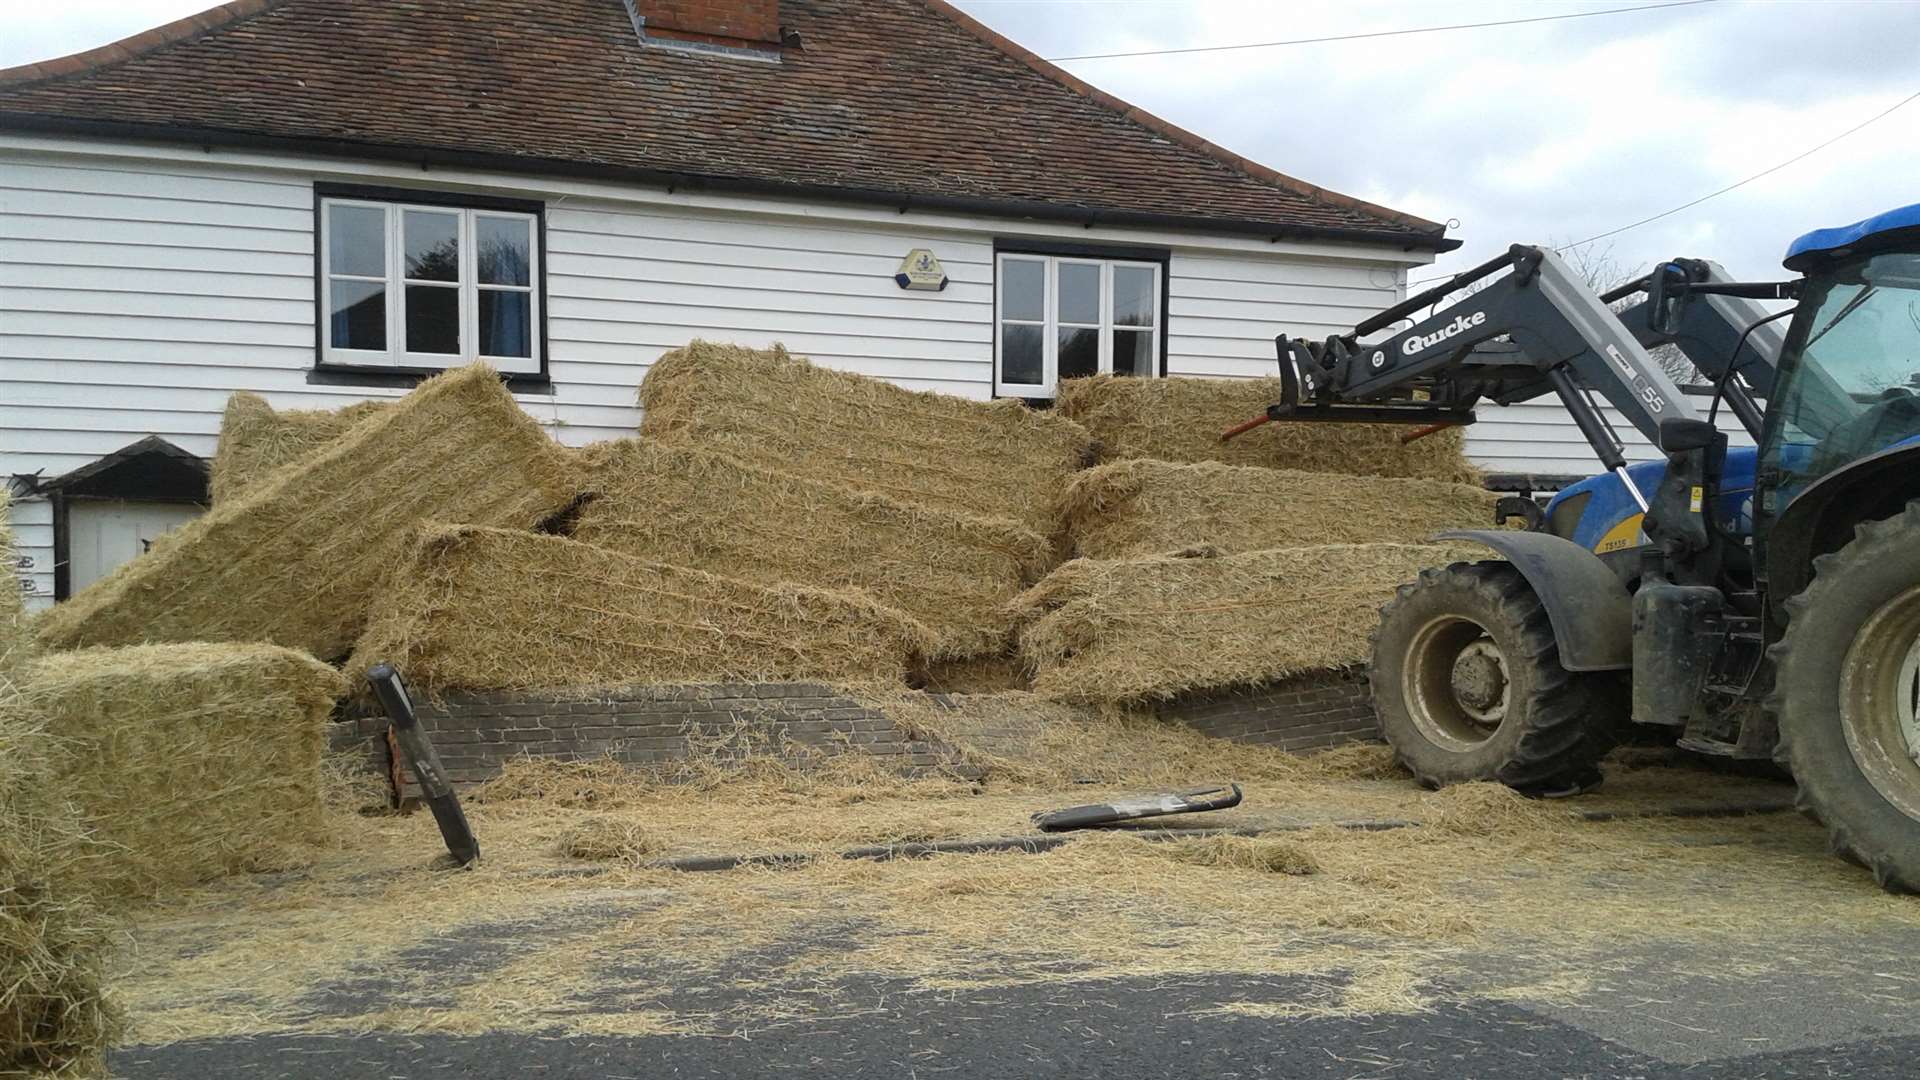 The wall was left damaged after the hay fell from the lorry